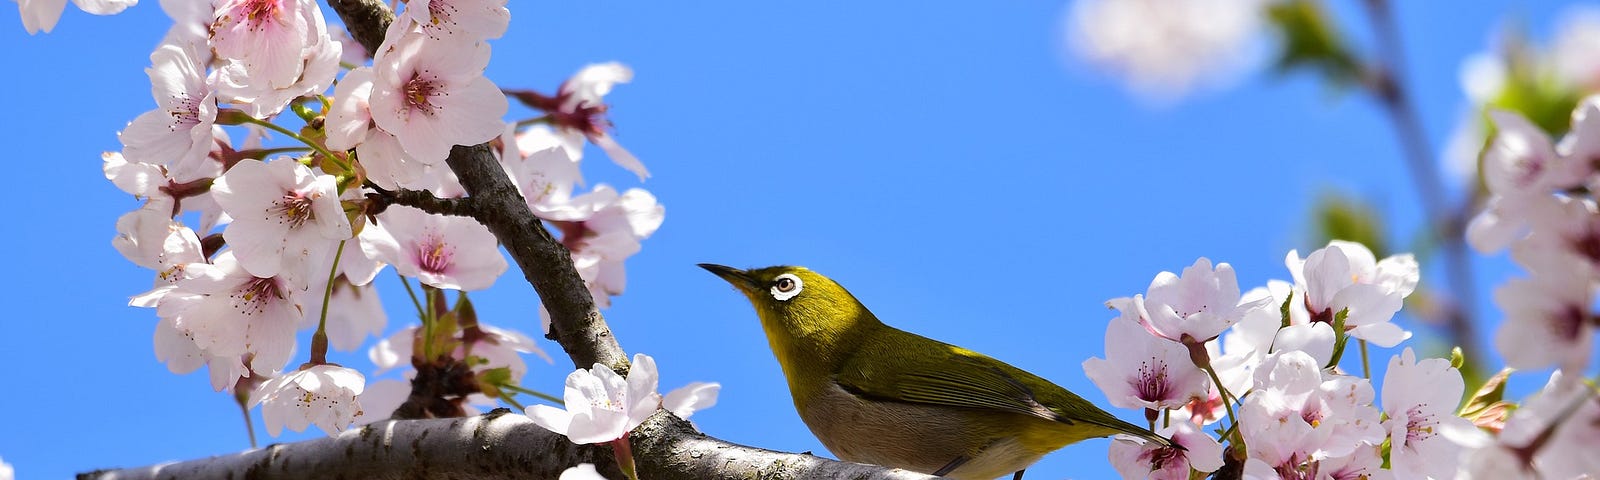 White eye bird with pale green body standing on branch among cherry blossoms.